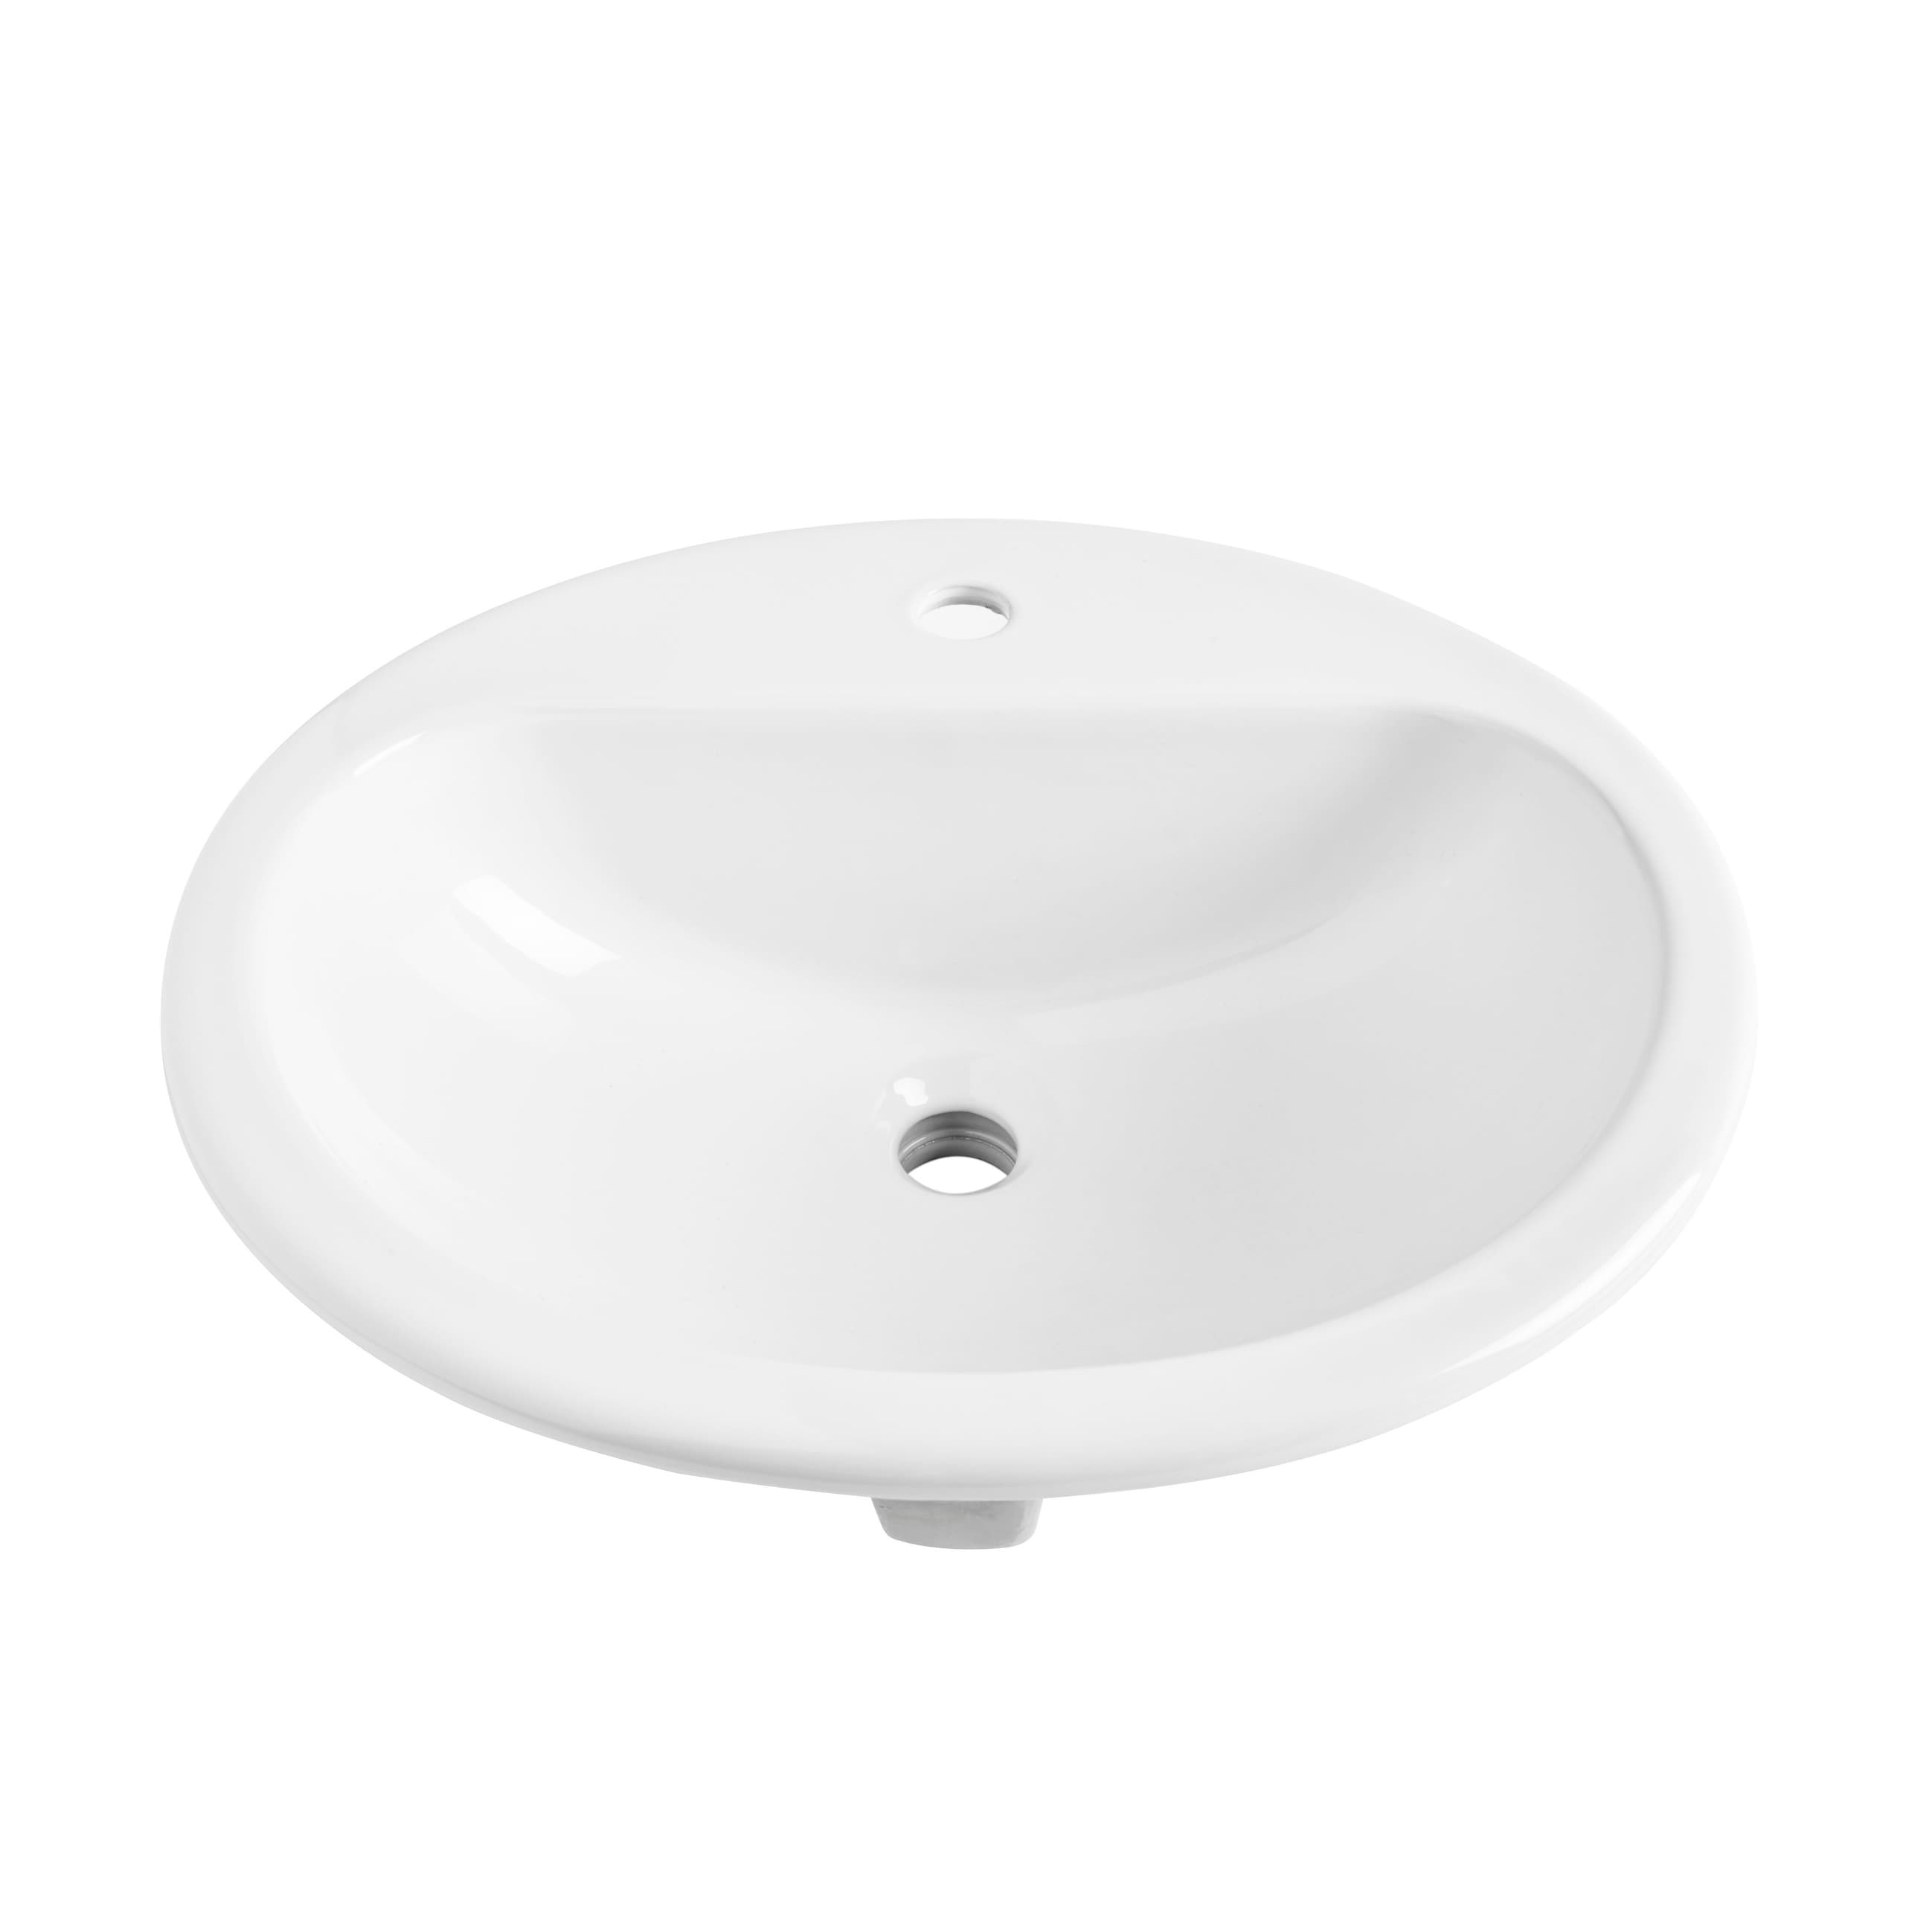 Sinkology Rene Oval Drop In Vitreous China Bathroom Sink In White With Overflow Drain